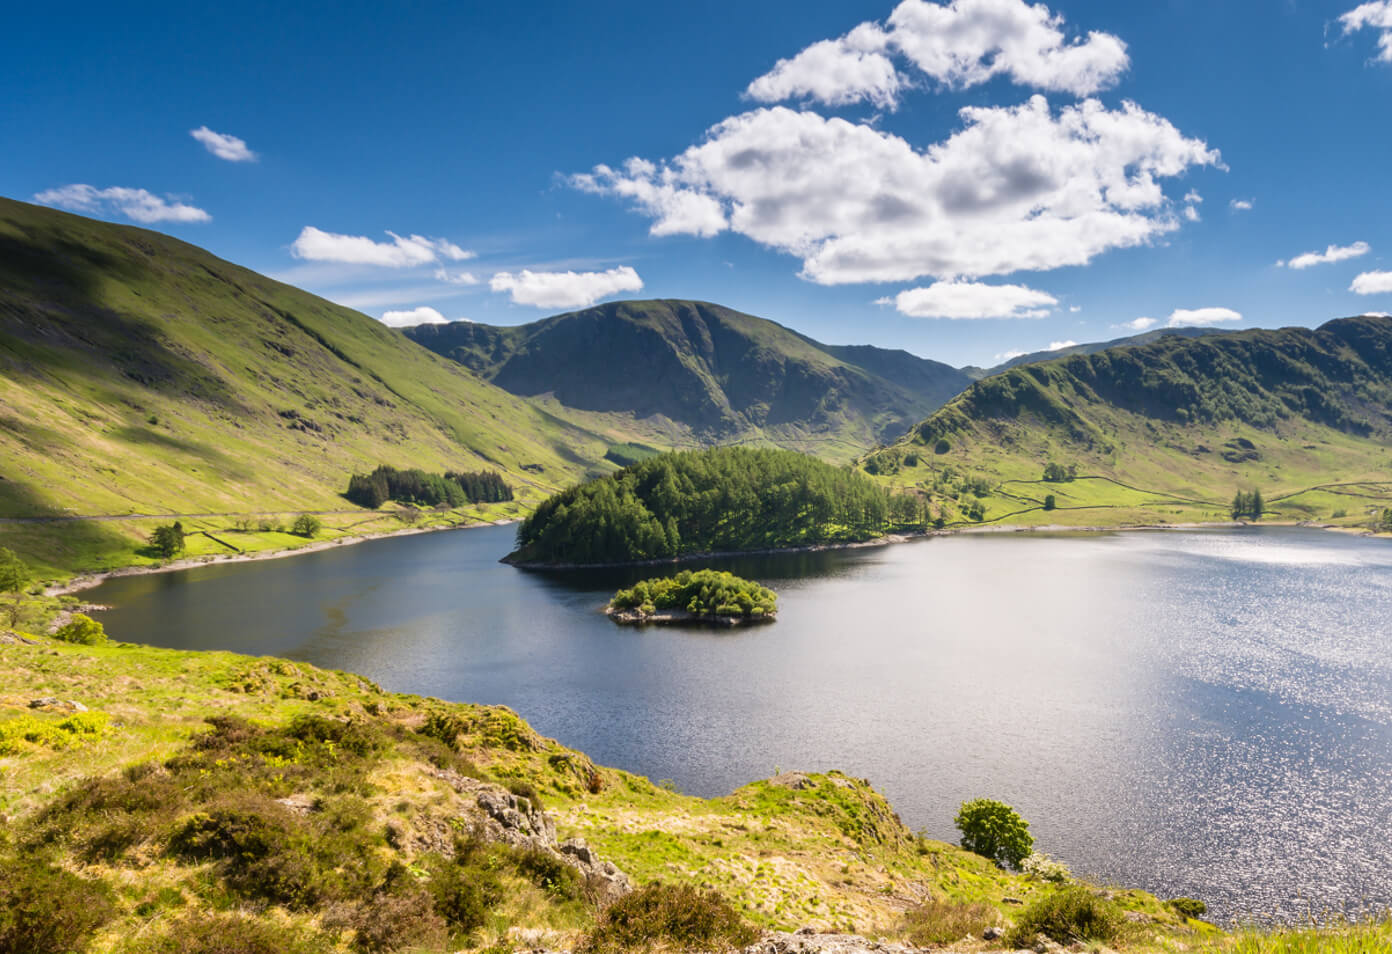 Haweswater is a reservoir built in the valley of Mardale and flooded in 1935